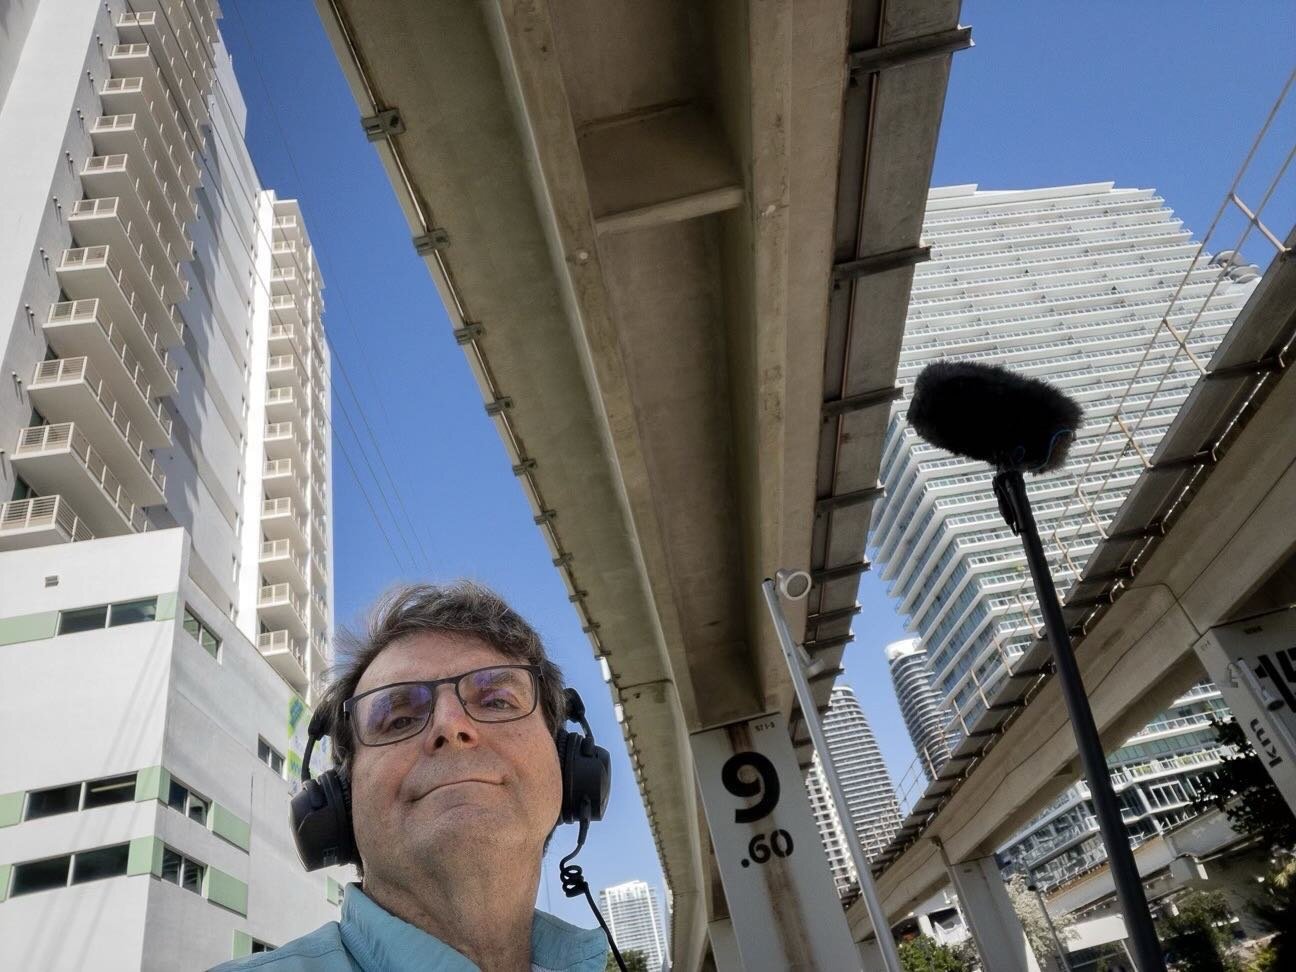 Recording under an elevated train yesterday &hellip; &ldquo;it&rsquo;s not a sound problem, it&rsquo;s a location problem&rdquo; 🙂, Miami, Florida. #setlife #soundrecording #productionsound #soundmixer #soundperson #locationsound #cinella #schoeps